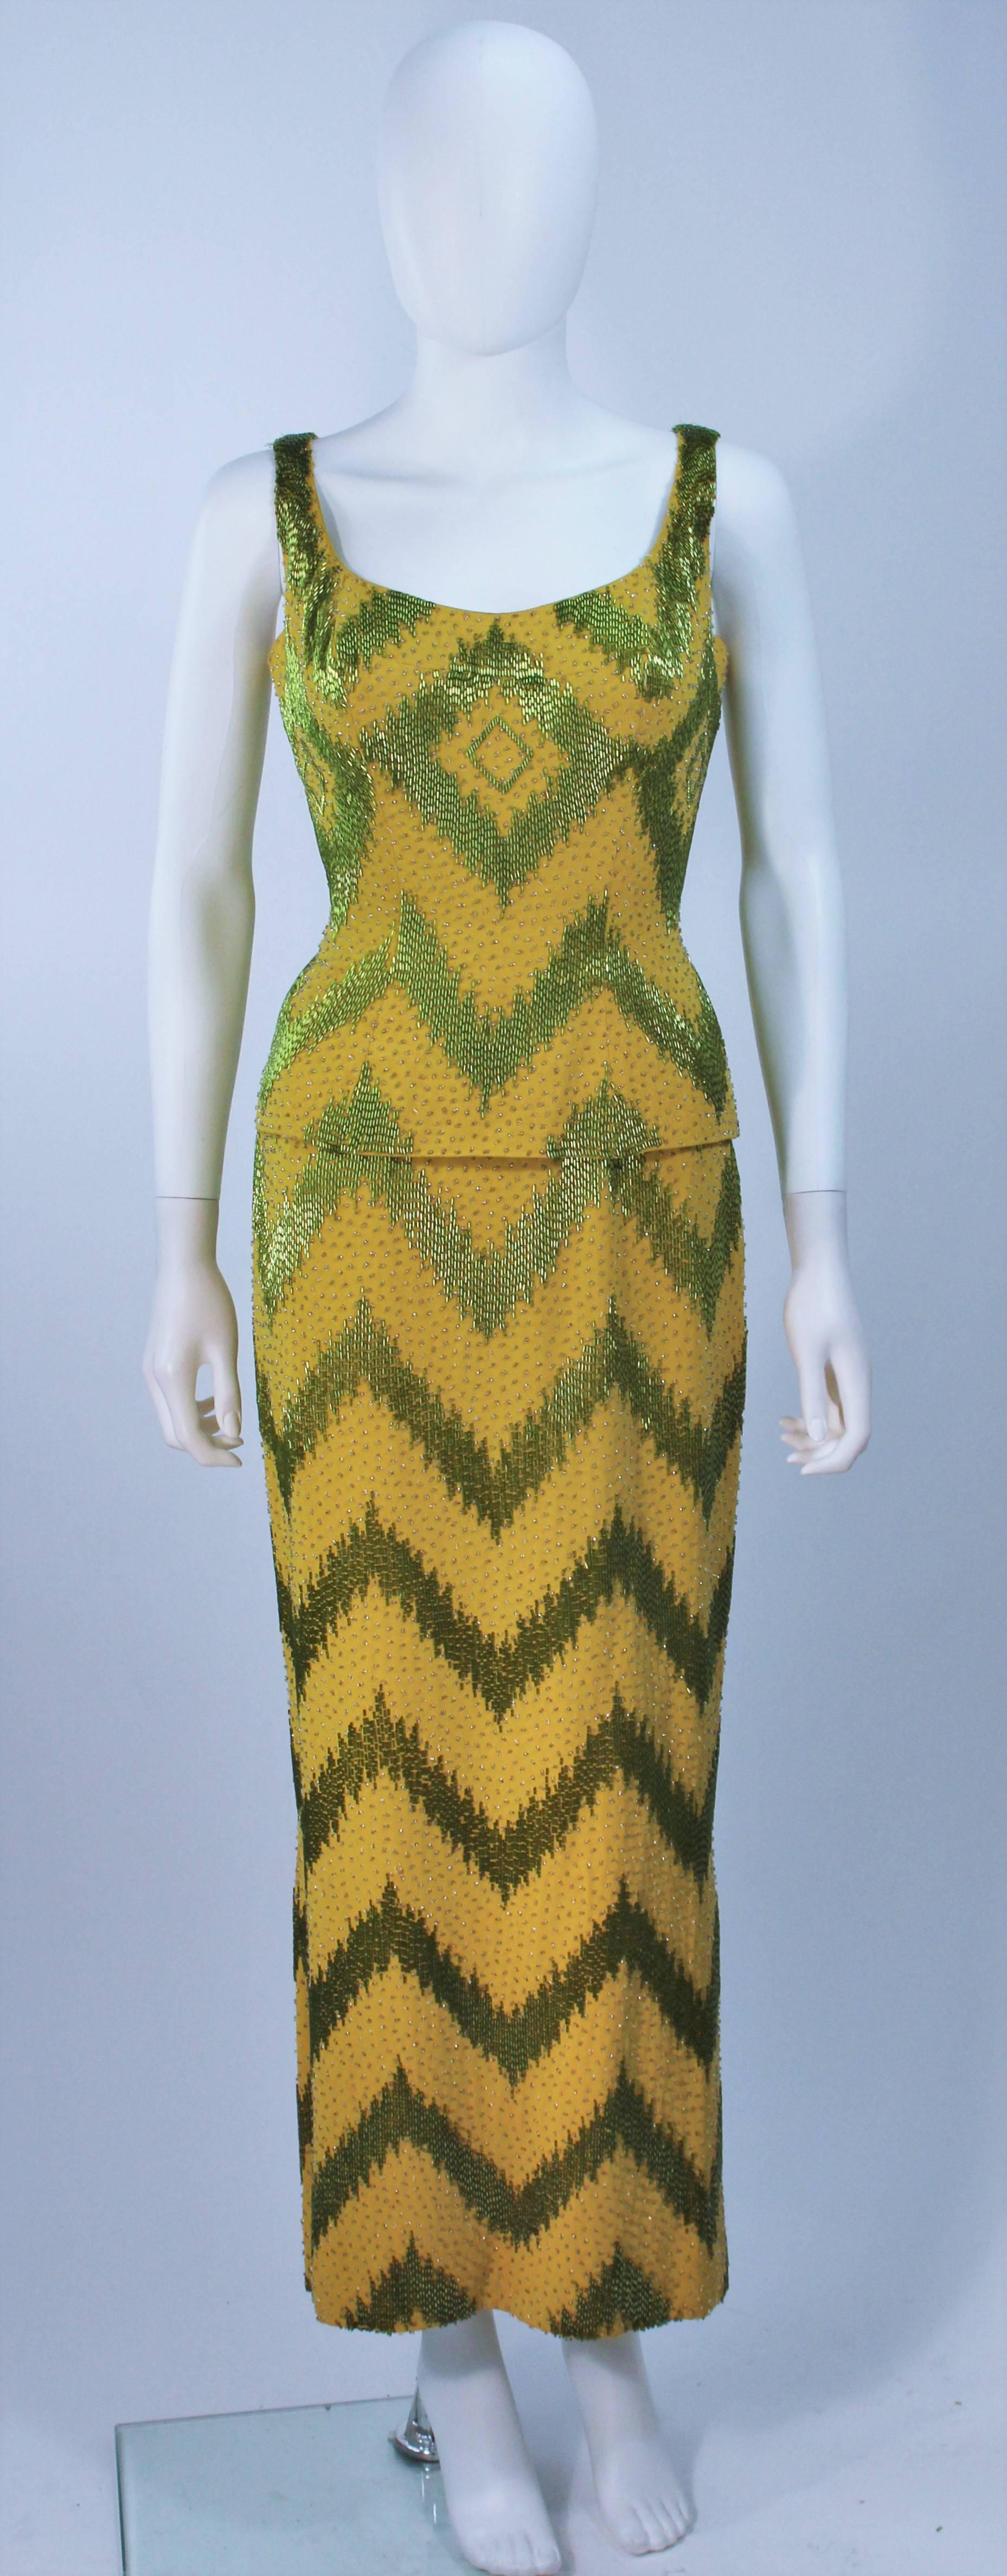  This gown is composed of two beaded pieces in green and chartreuse hues. There are zipper closures. In great vintage condition.

  **Please cross-reference measurements for personal accuracy. Size in description box is an estimation.

Measures